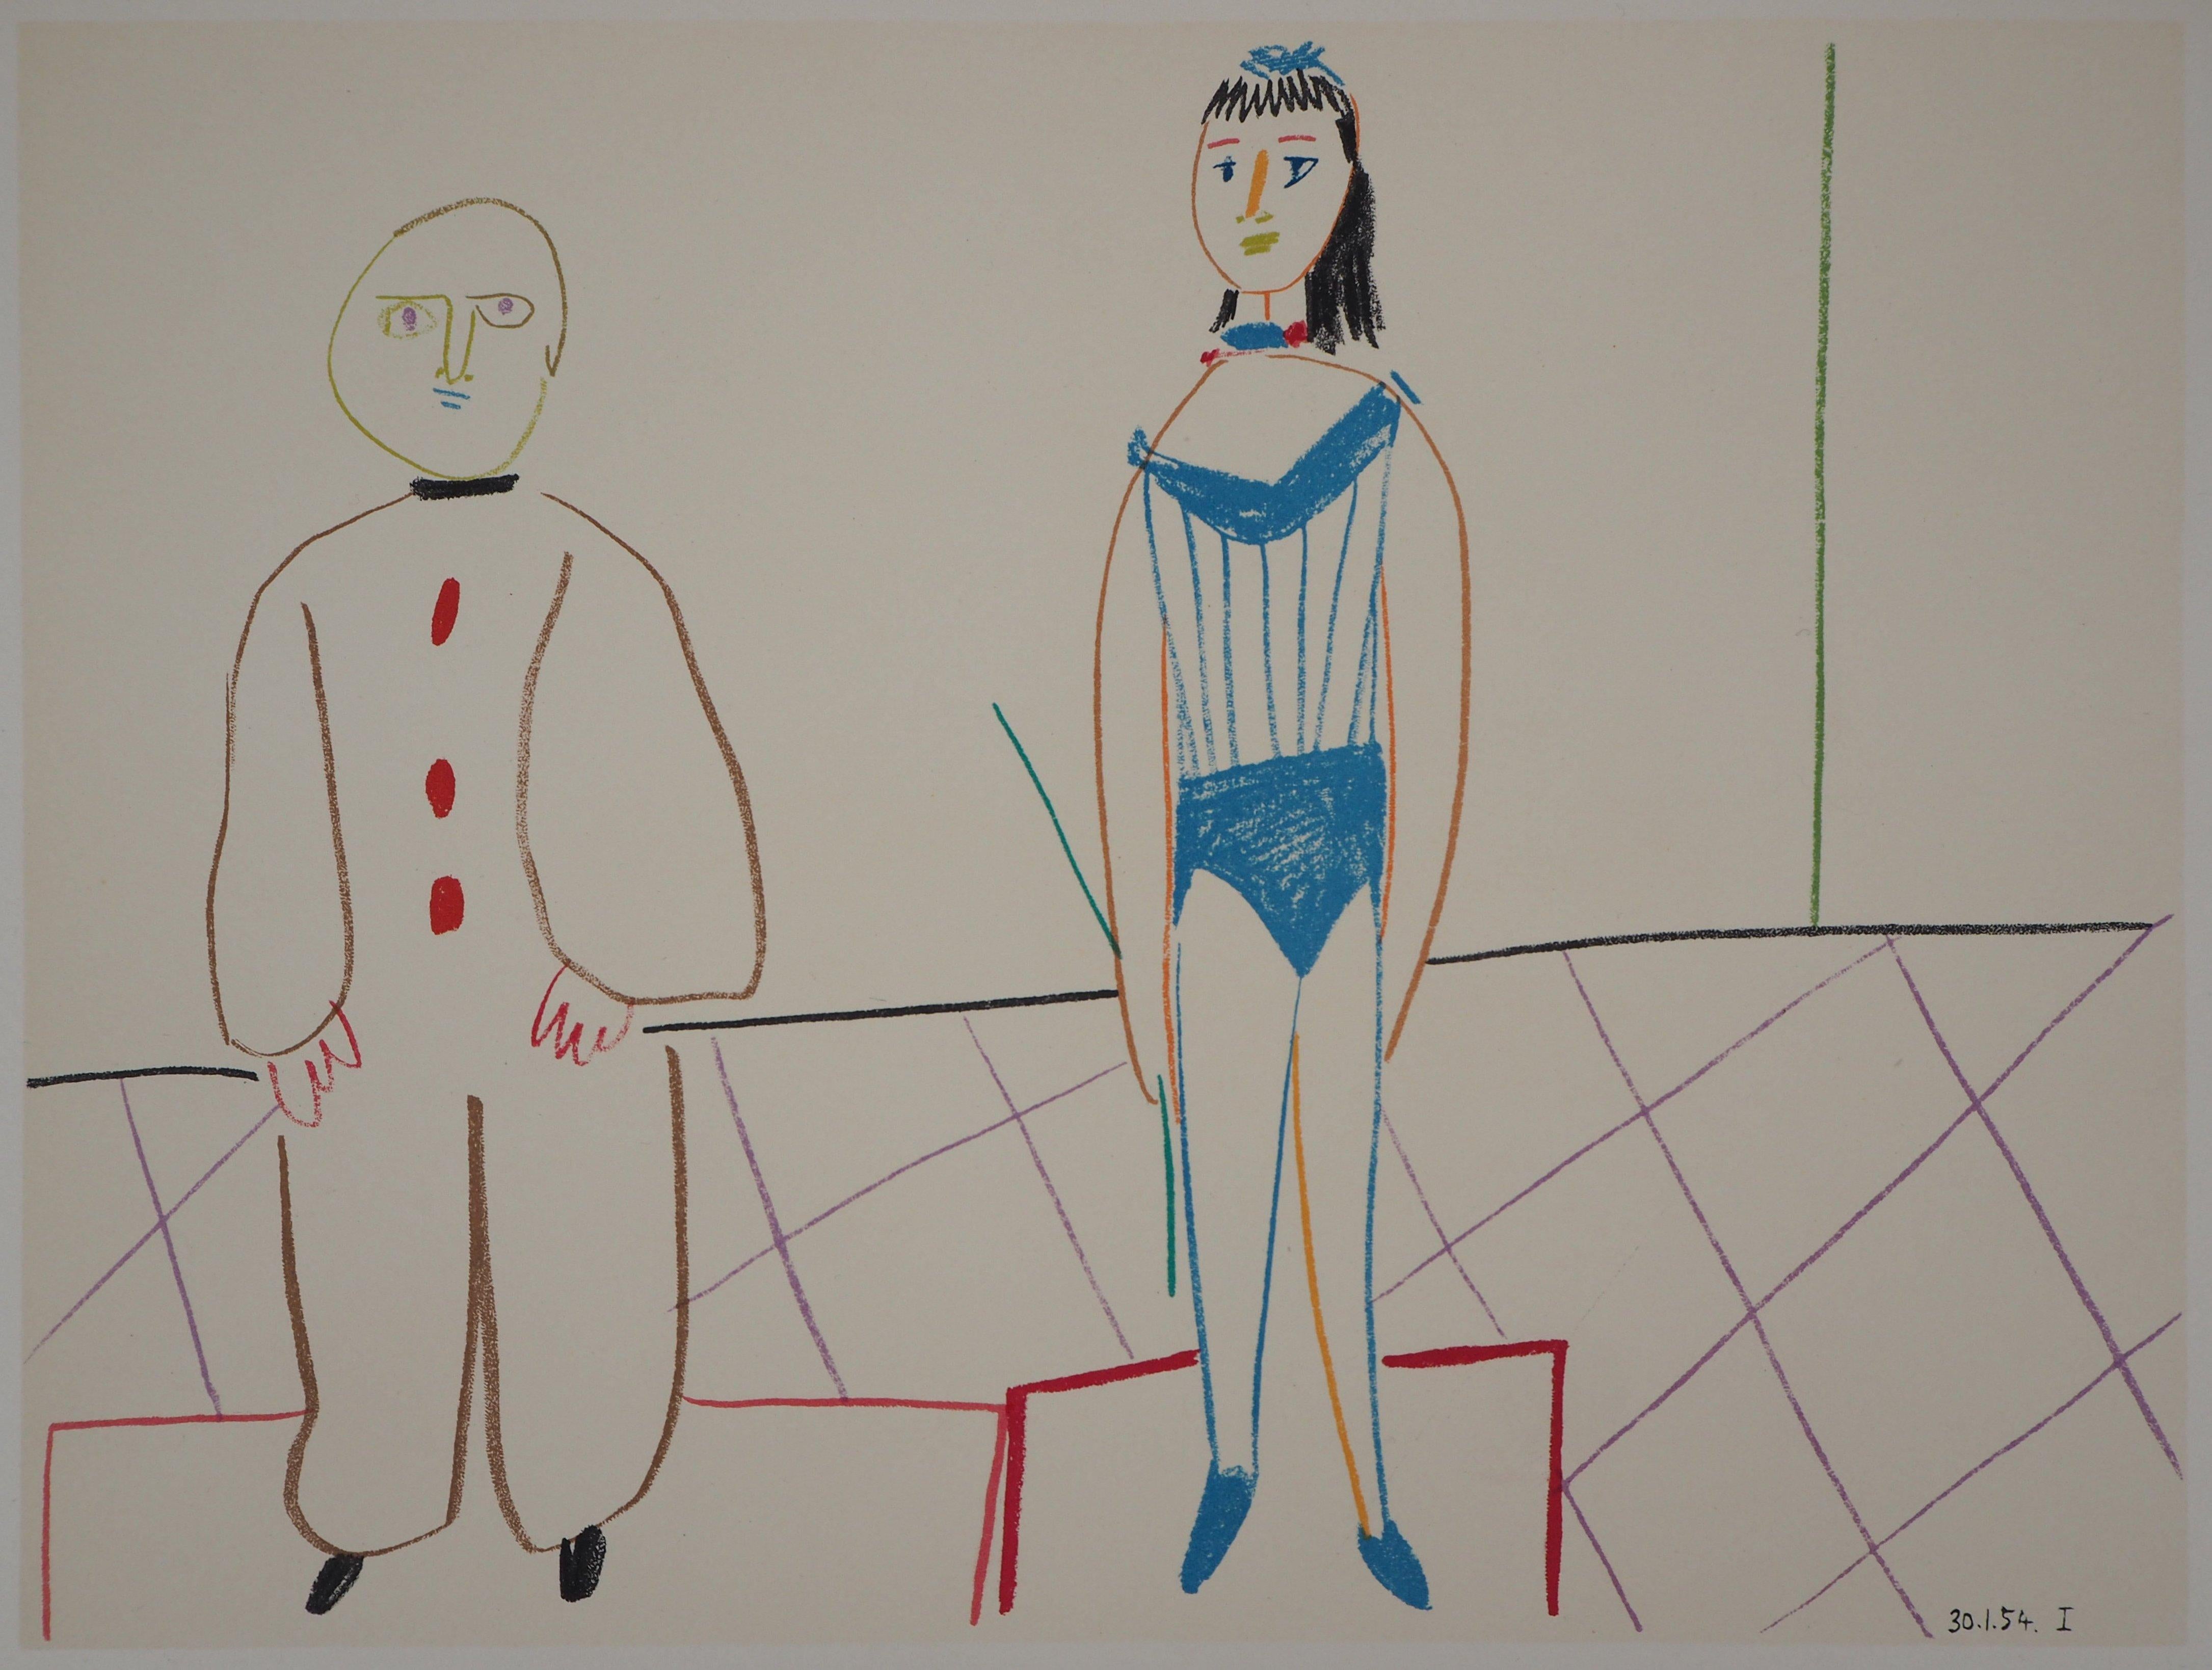 (after) Pablo Picasso Figurative Print - The Two Artists of the Circus - Lithograph - Verve, Mourlot 